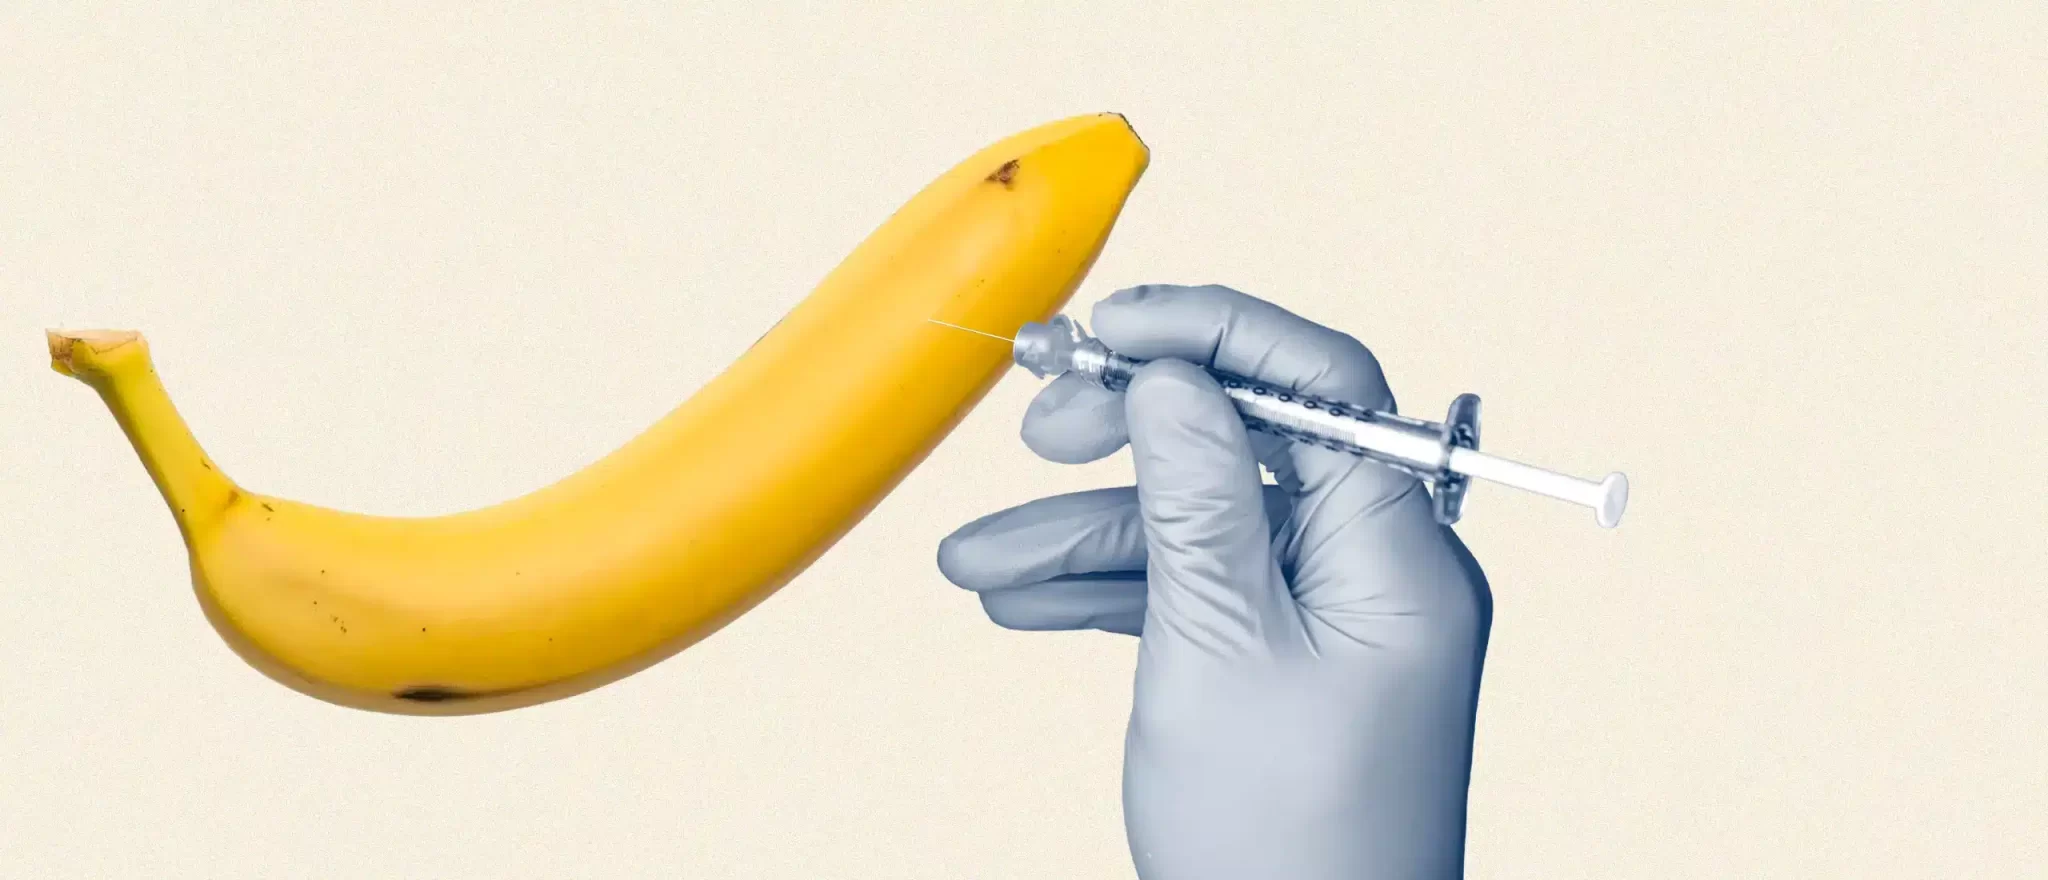 Illustration showing a syringe with the label "P-shot" against a backdrop representing sexual wellness.